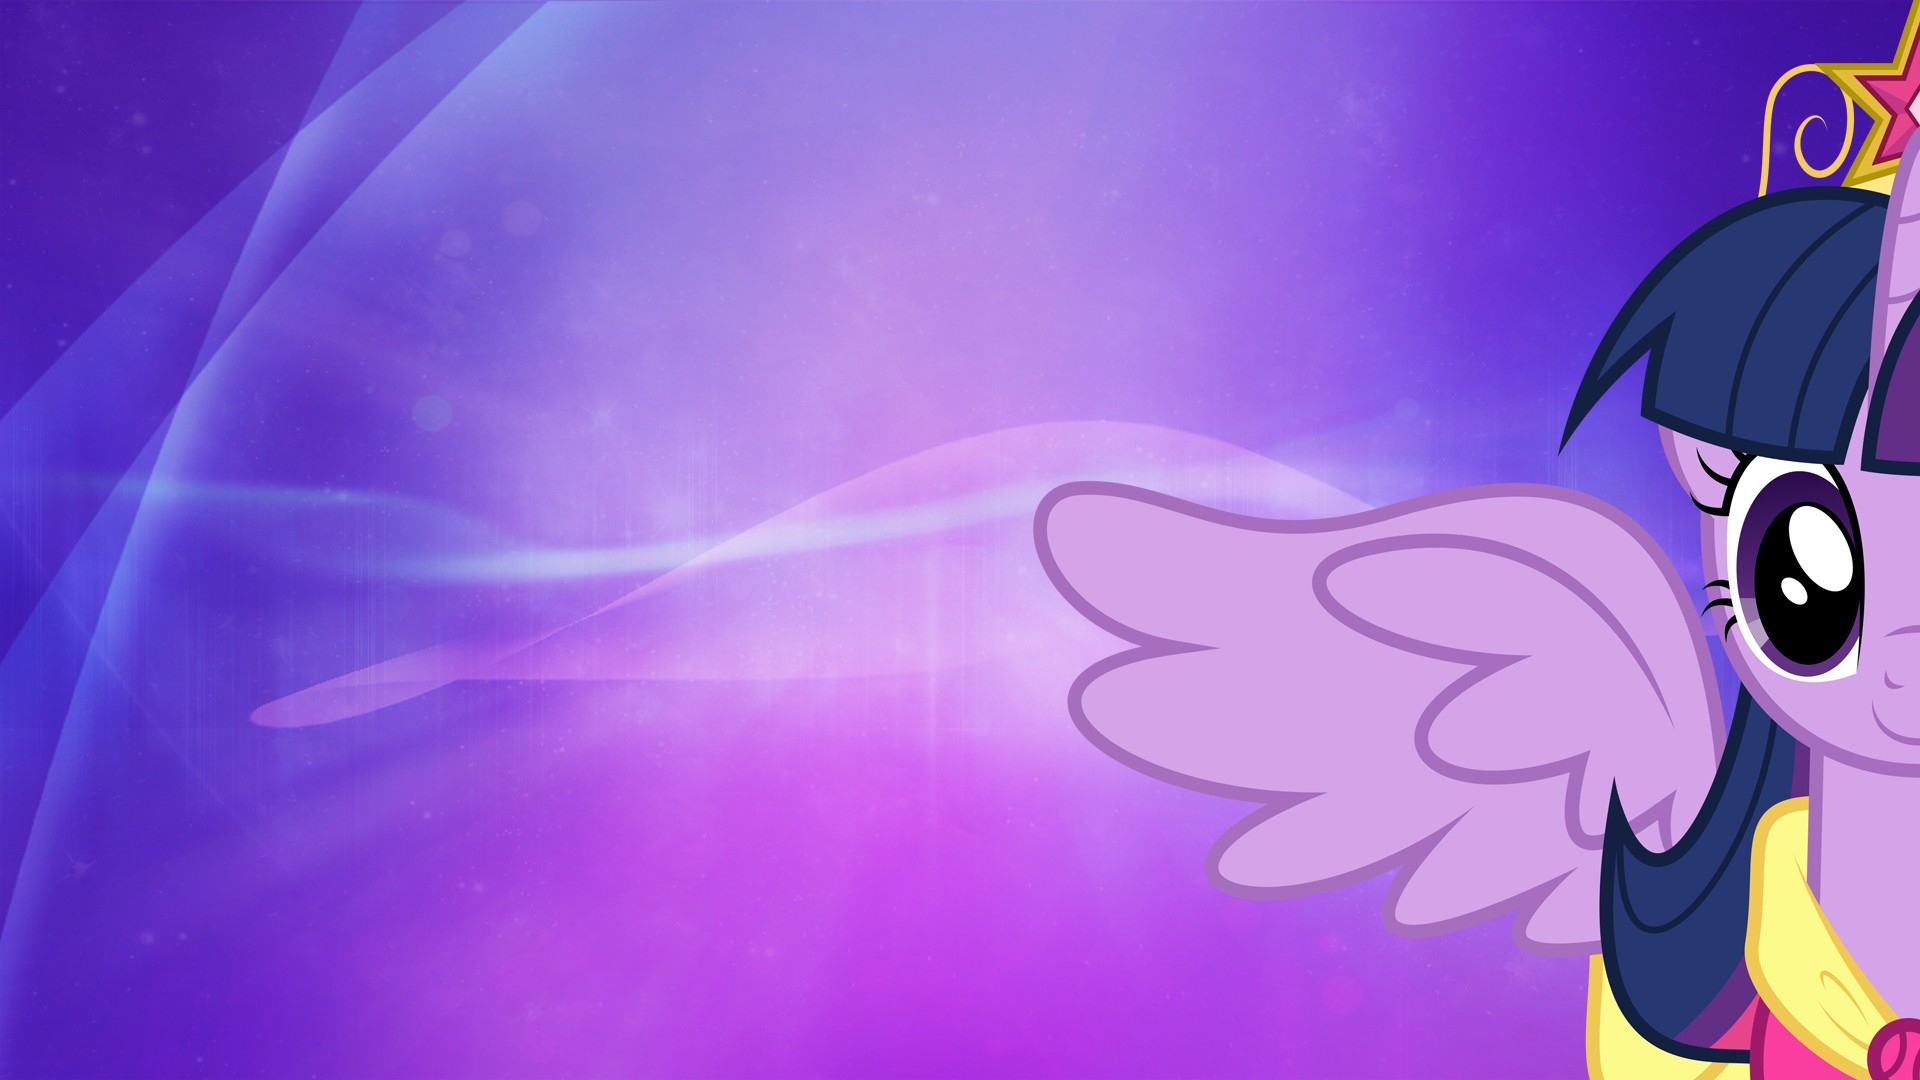 1920x1080 magic, My, Little, Pony, Ponies, Twilight, Sparkle, Cutie, Mark, My, Little, Pony , Friendship, Is, Magic, Equestria, Princess, Twilight, Sparkle Wallpapers HD / Desktop and Mobile Backgrounds